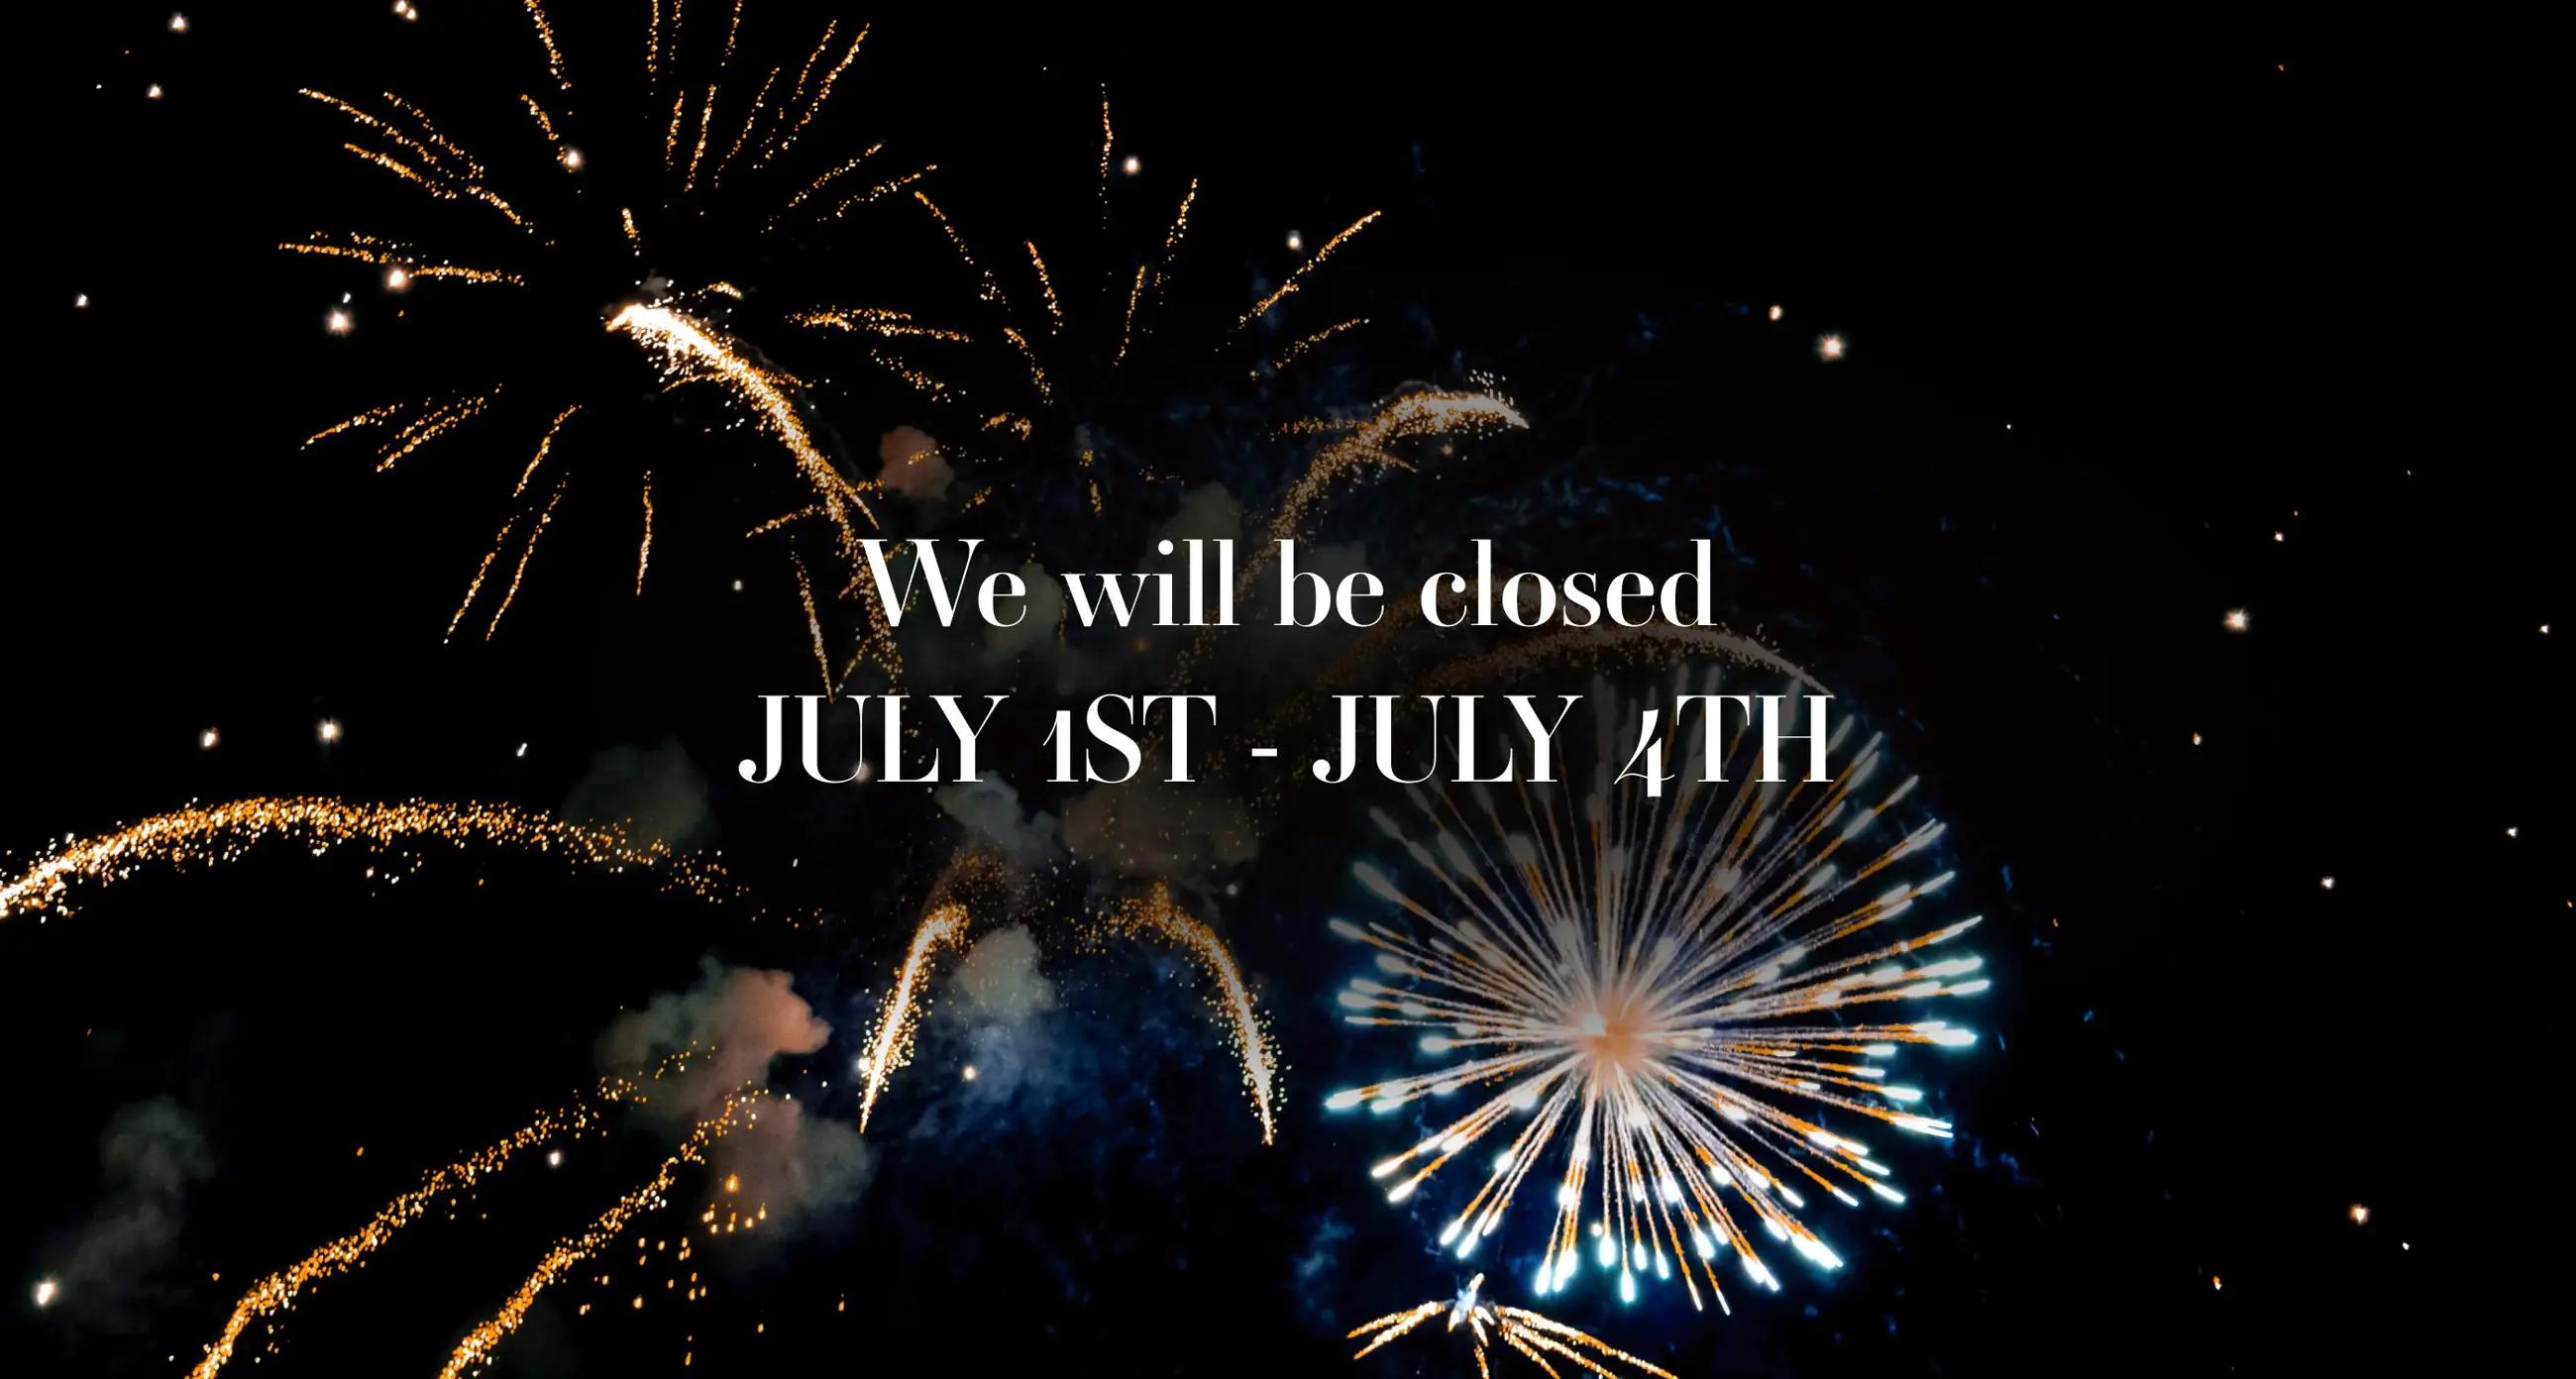 Closed banner for the 4th of July at Mimi's Bridal. Closed July 1st - July 4th.